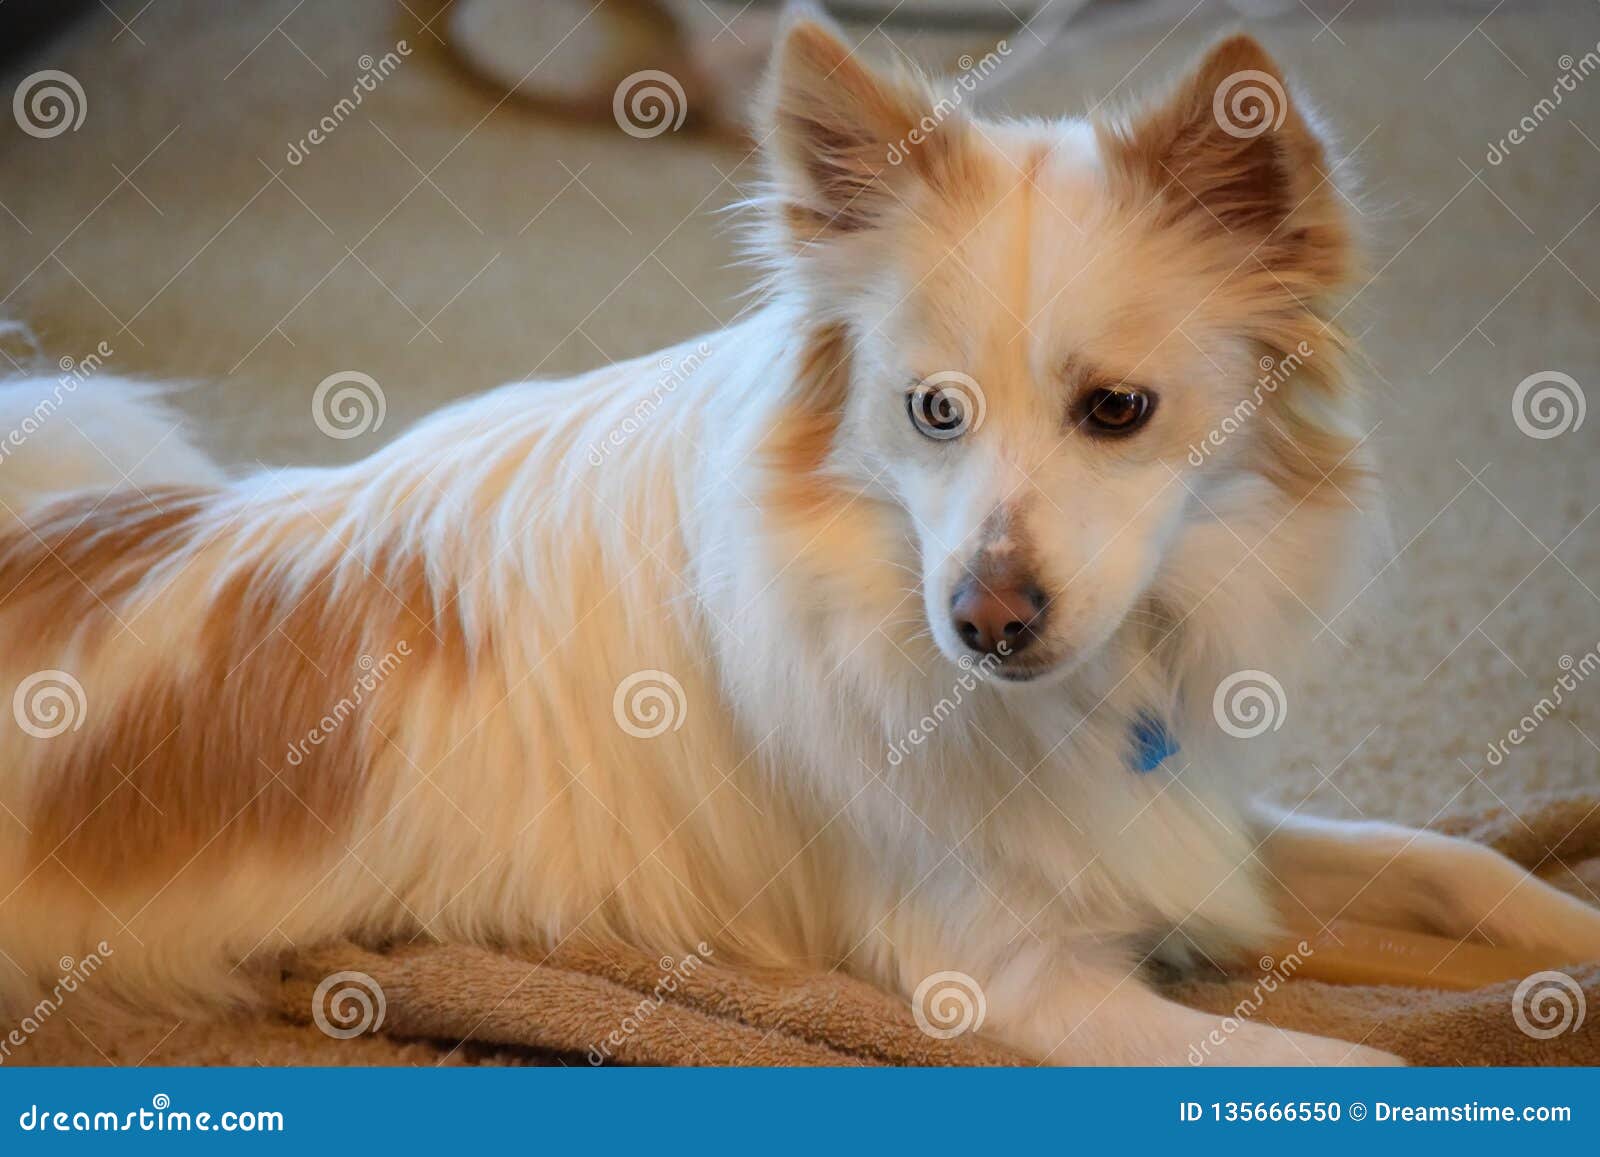 27 Spitz Mix Photos Free Royalty Free Stock Photos From Dreamstime